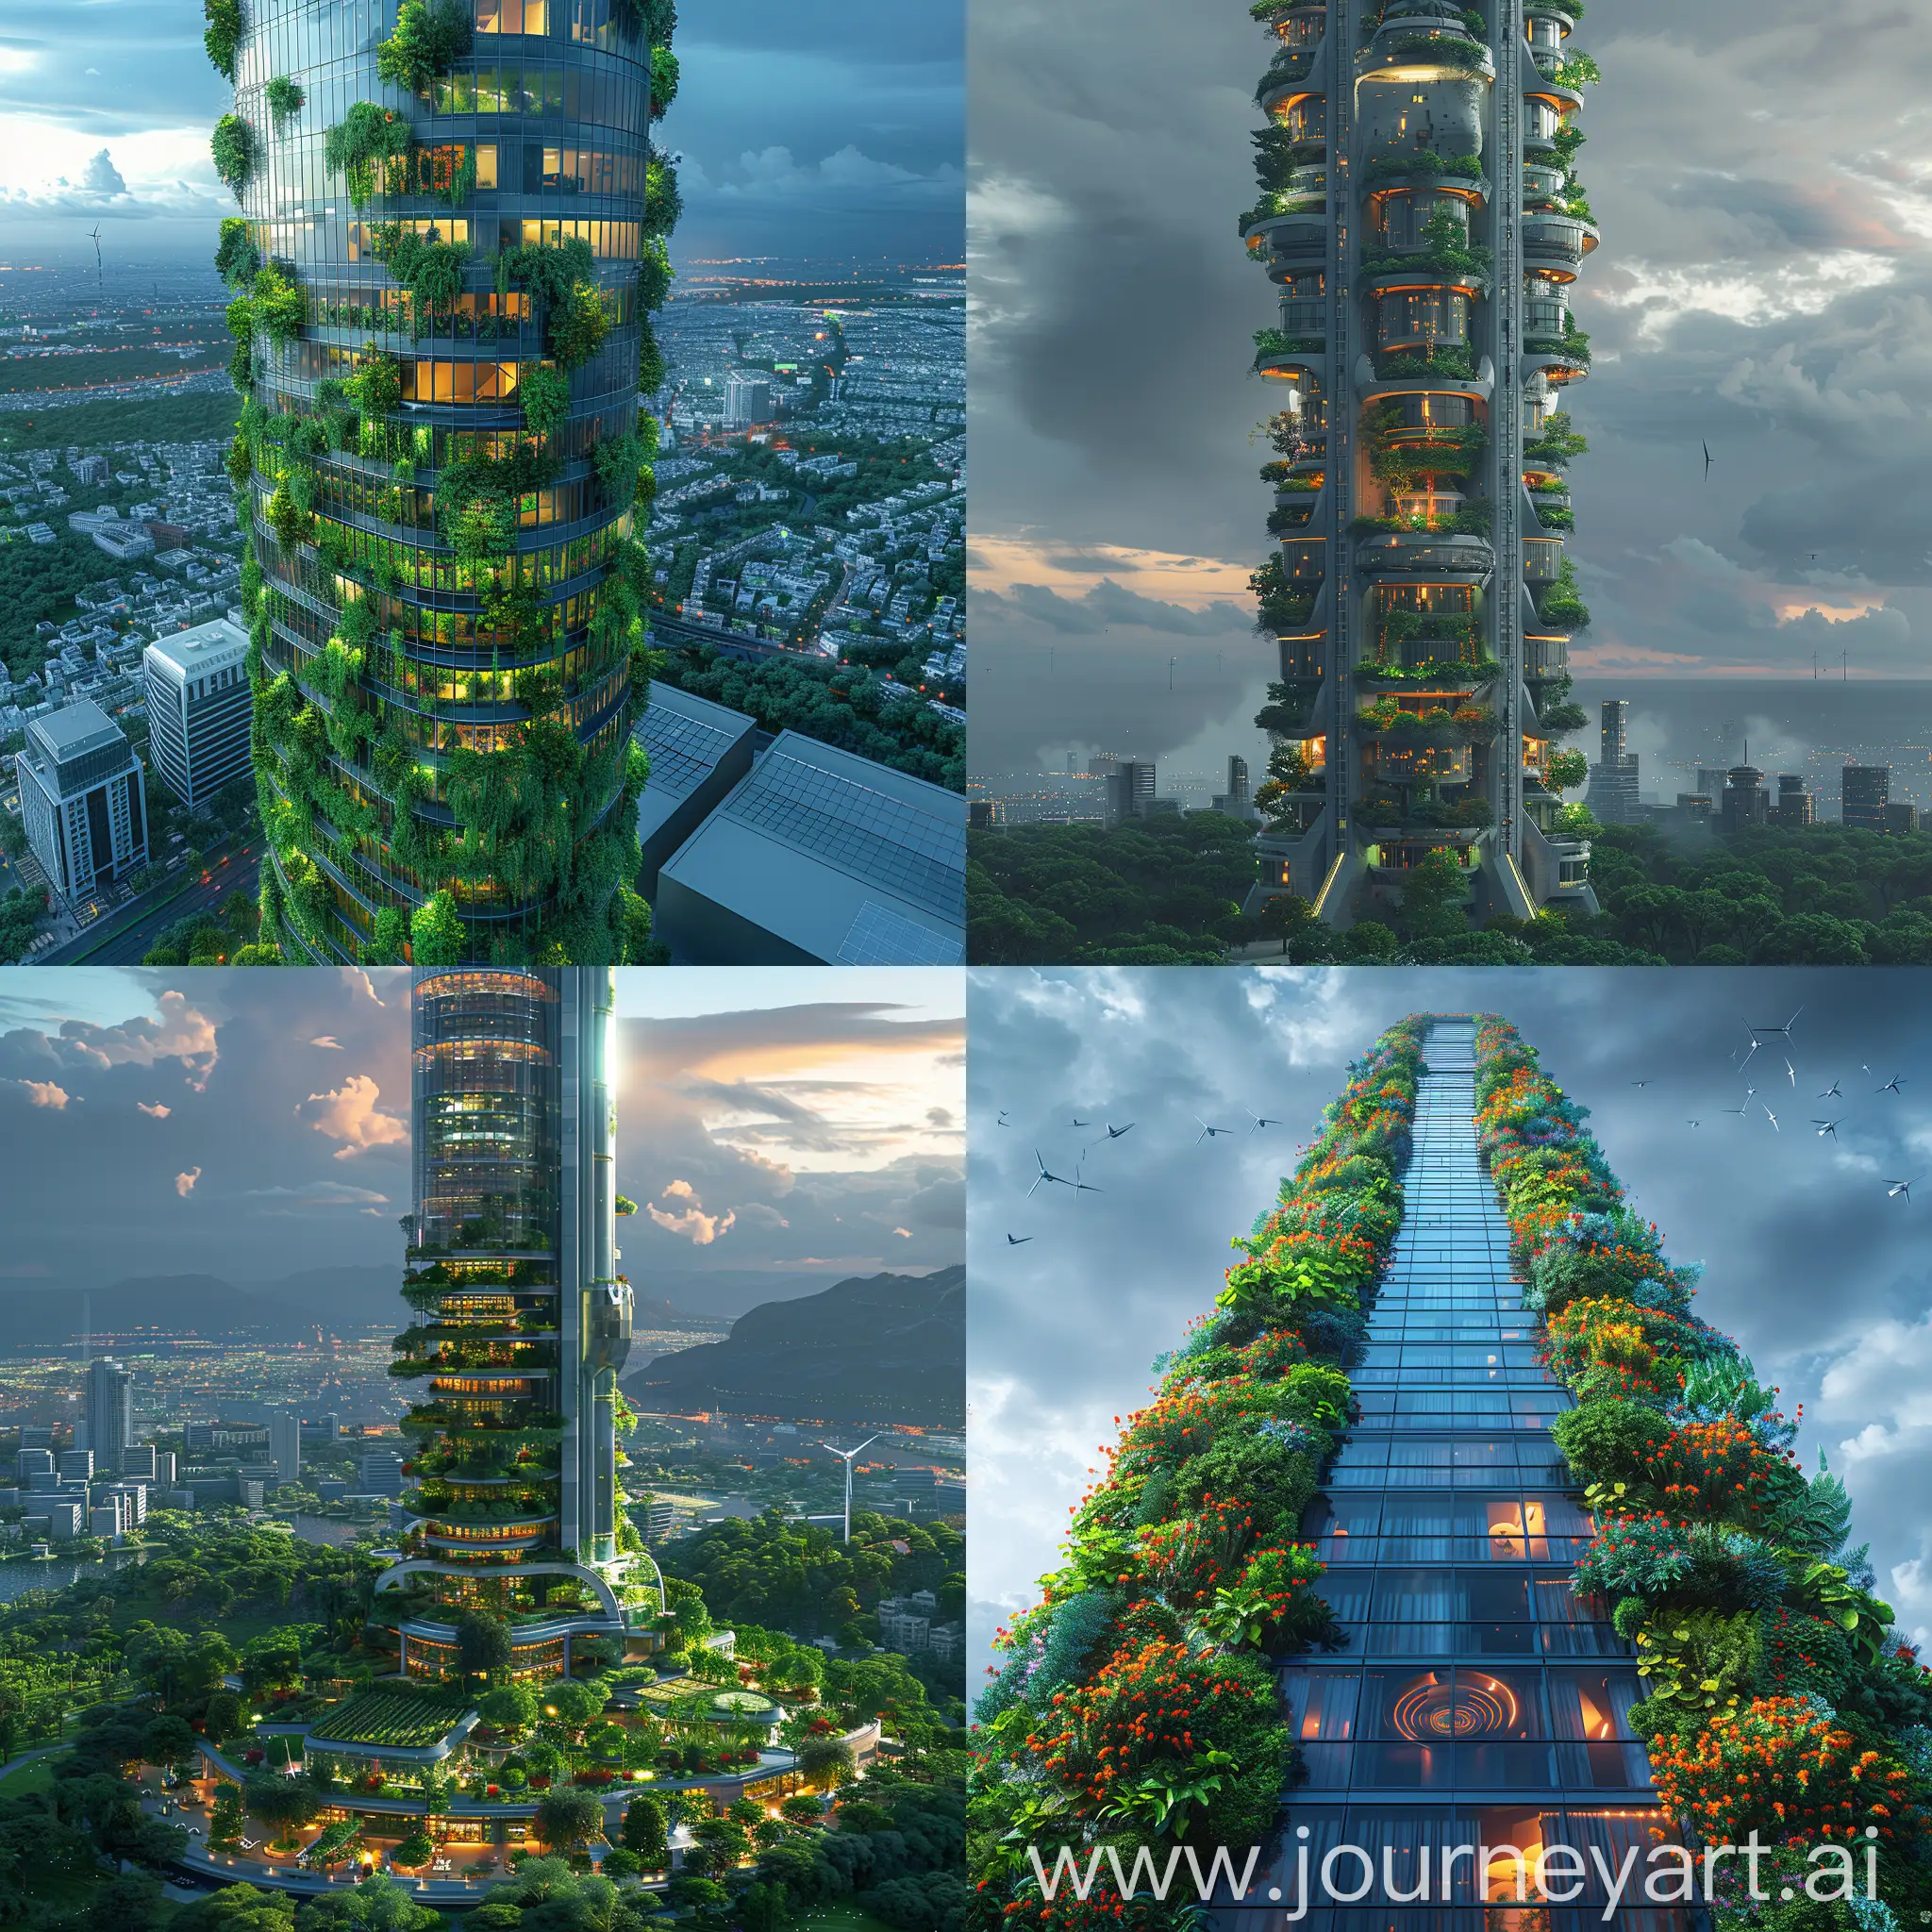 Futuristic skyscraper, Green Roofs, Solar Panels, Wind Turbines, Rainwater Harvesting System, Greywater Recycling, Energy-Efficient Glass, Natural Ventilation, Energy Monitoring System, Vertical Gardens, Recycled Materials, Smart Sensors, AI Building Management System, Augmented Reality Windows, Biometric Security Systems, Self-Healing Materials, Self-Healing Materials, Holographic Displays, Robotic Maintenance Drones, Virtual Reality Fitness Center, Hydroponic Farming, Self-Cleaning Surfaces, Nanomaterial Insulation, Nanotech Solar Windows, Nanomembrane Water Filters, Nanotech Air Purification, Nanosensors for Structural Health Monitoring, Nanotech Energy Storage, Nanorobots for Maintenance, Nanotech Smart Windows, Nanomaterials for Lightweight Construction, octane render --stylize 1000